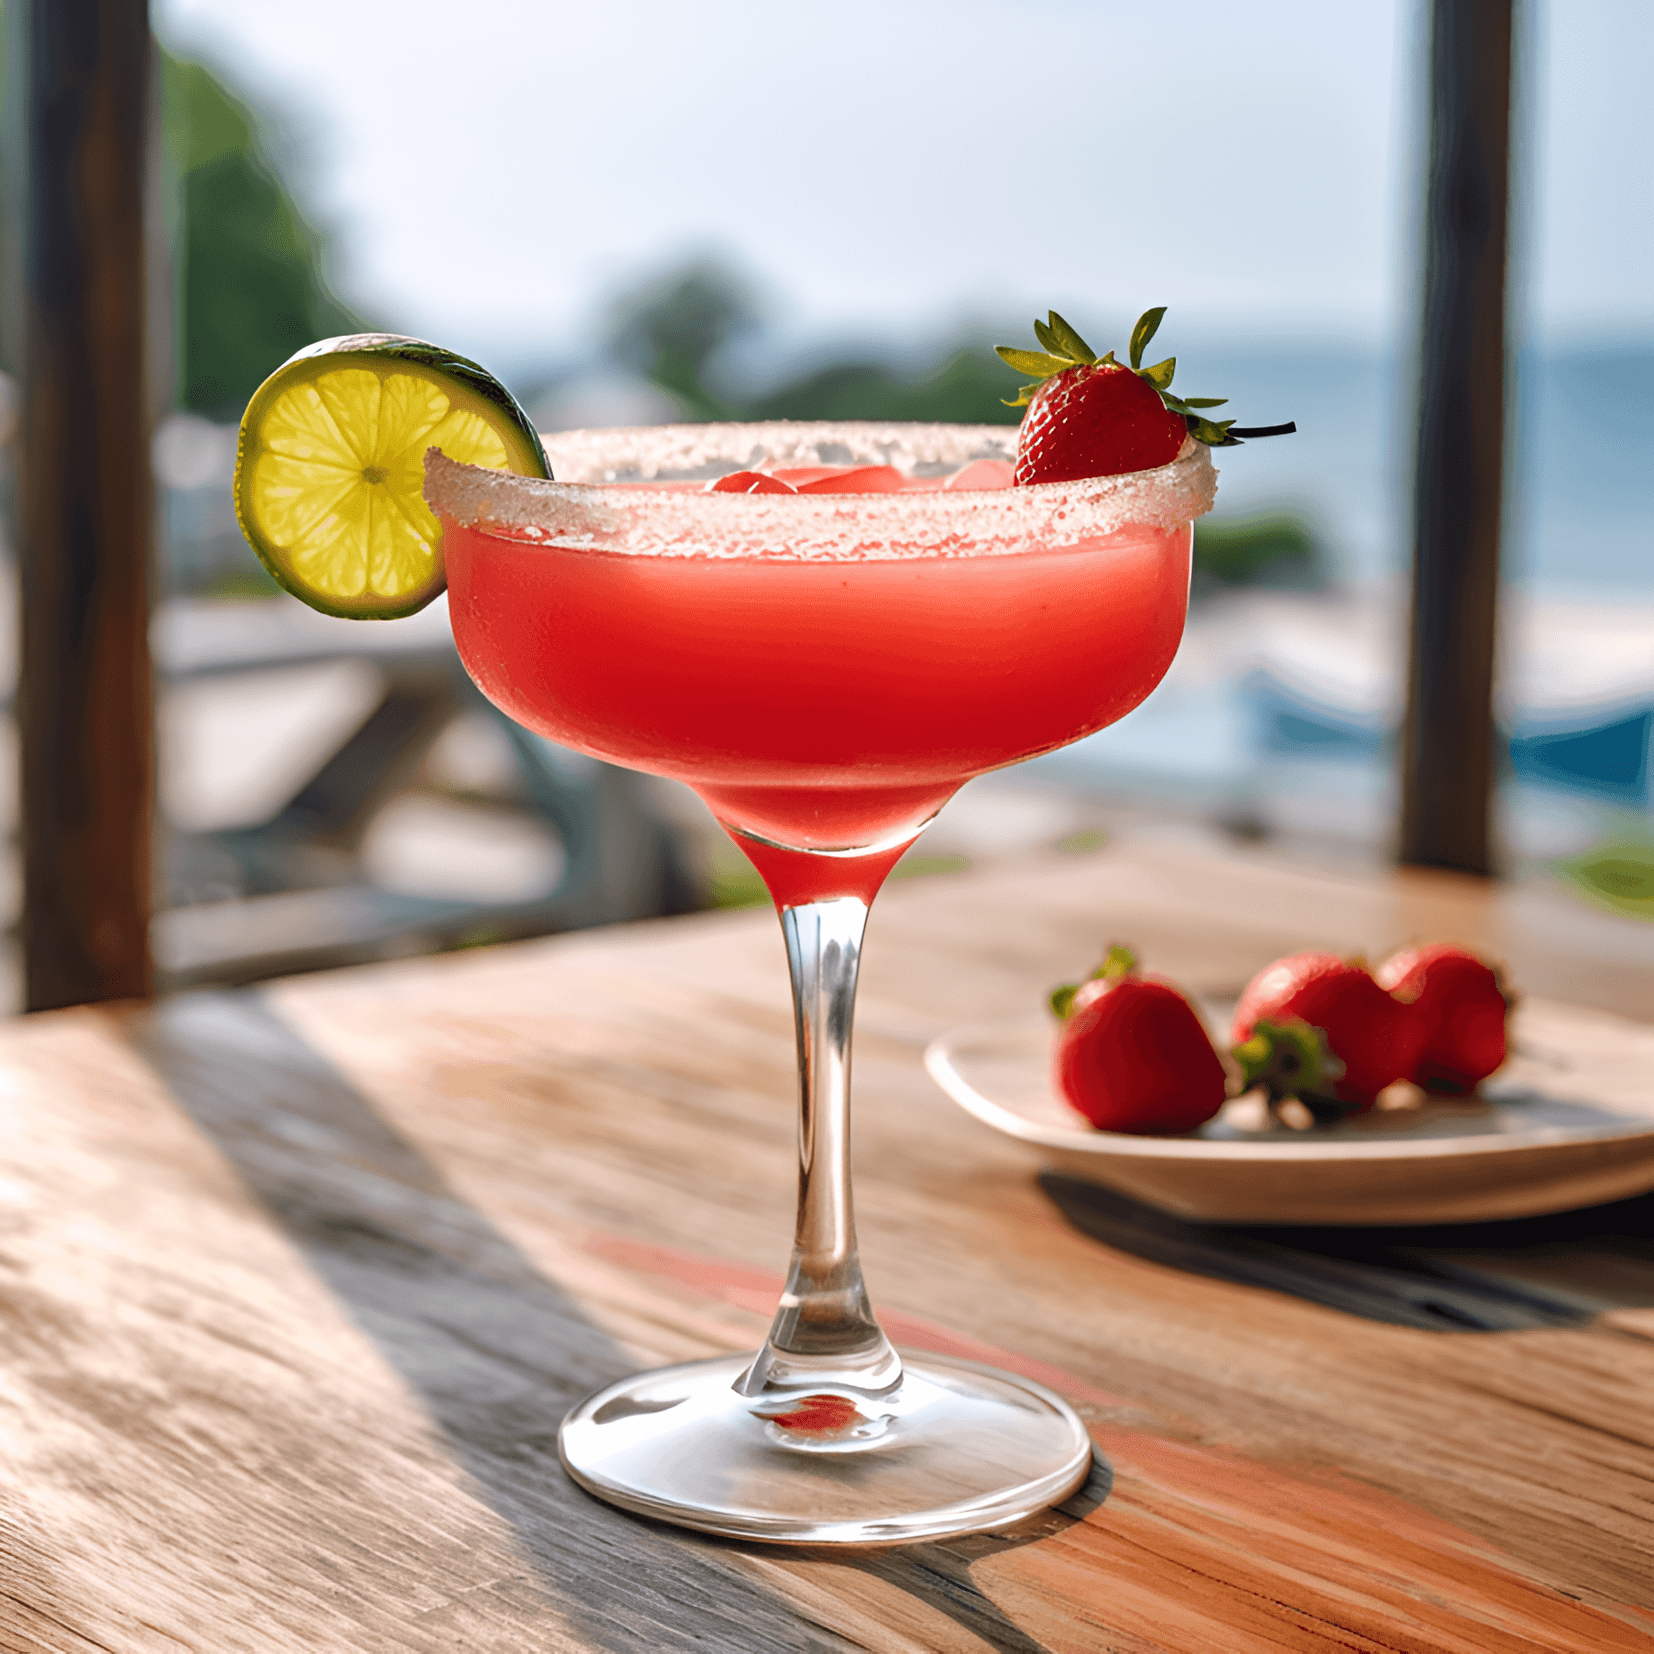 Strawberry Margarita Cocktail Recipe - The Strawberry Margarita has a sweet and tangy taste, with a hint of tartness from the lime juice. The fresh strawberries add a fruity and refreshing flavor, while the tequila provides a subtle warmth and kick.